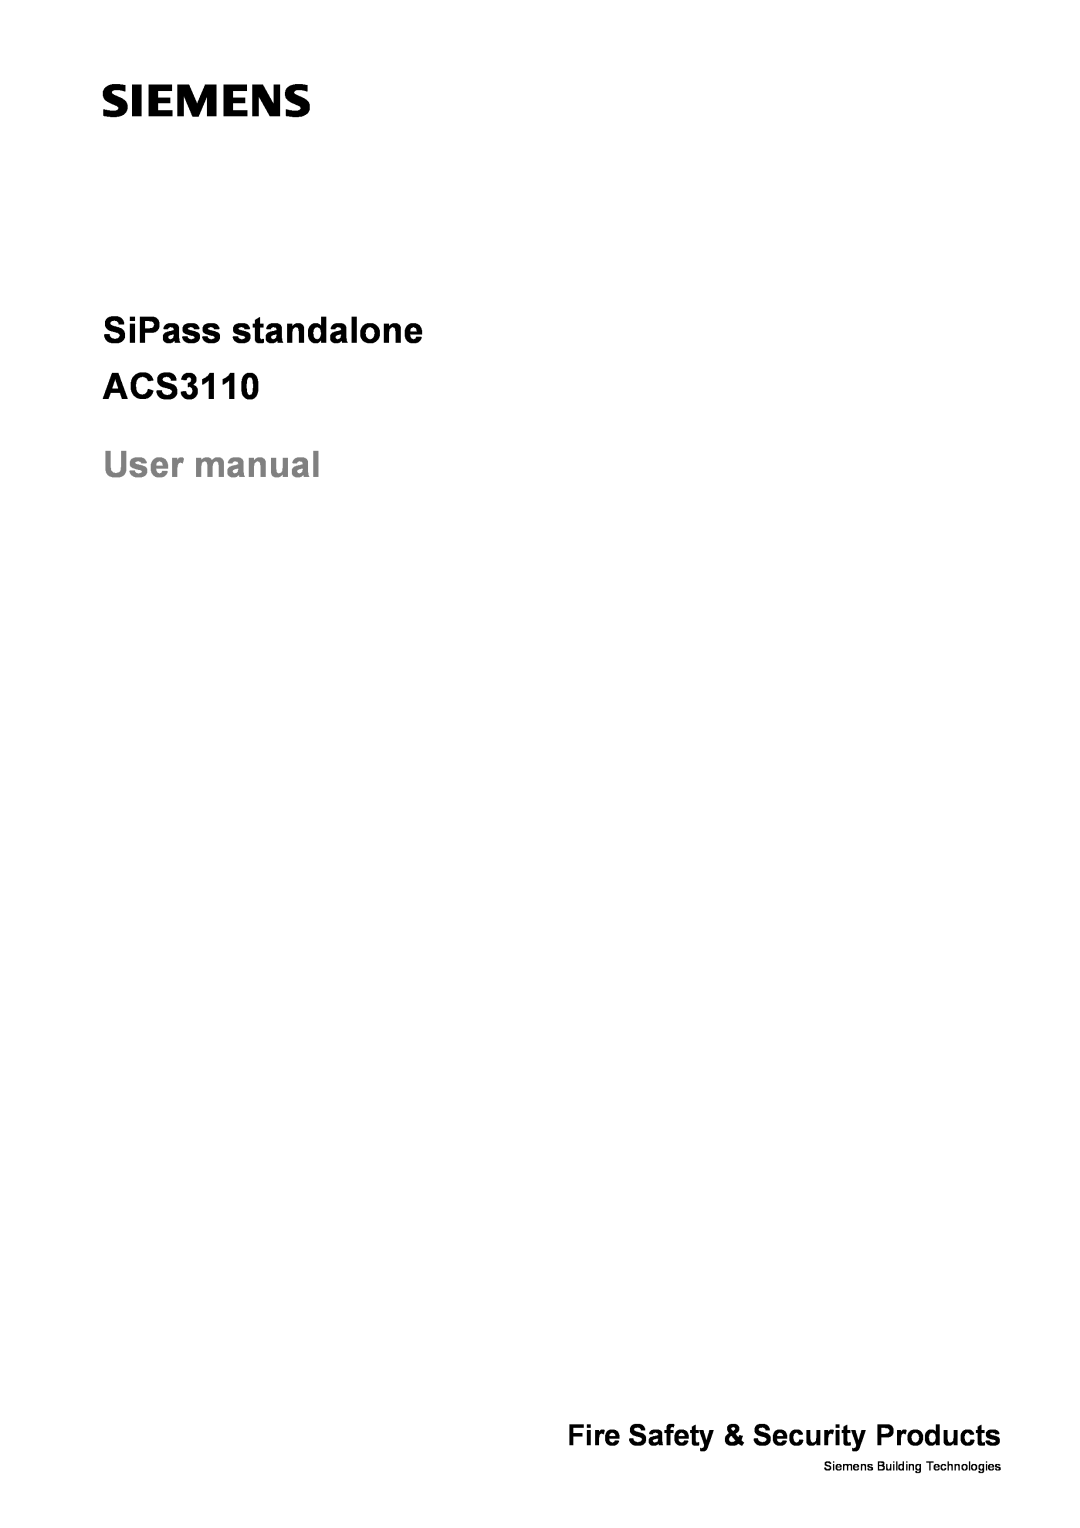 Siemens user manual SiPass standalone ACS3110, Fire Safety & Security Products, Siemens Building Technologies 